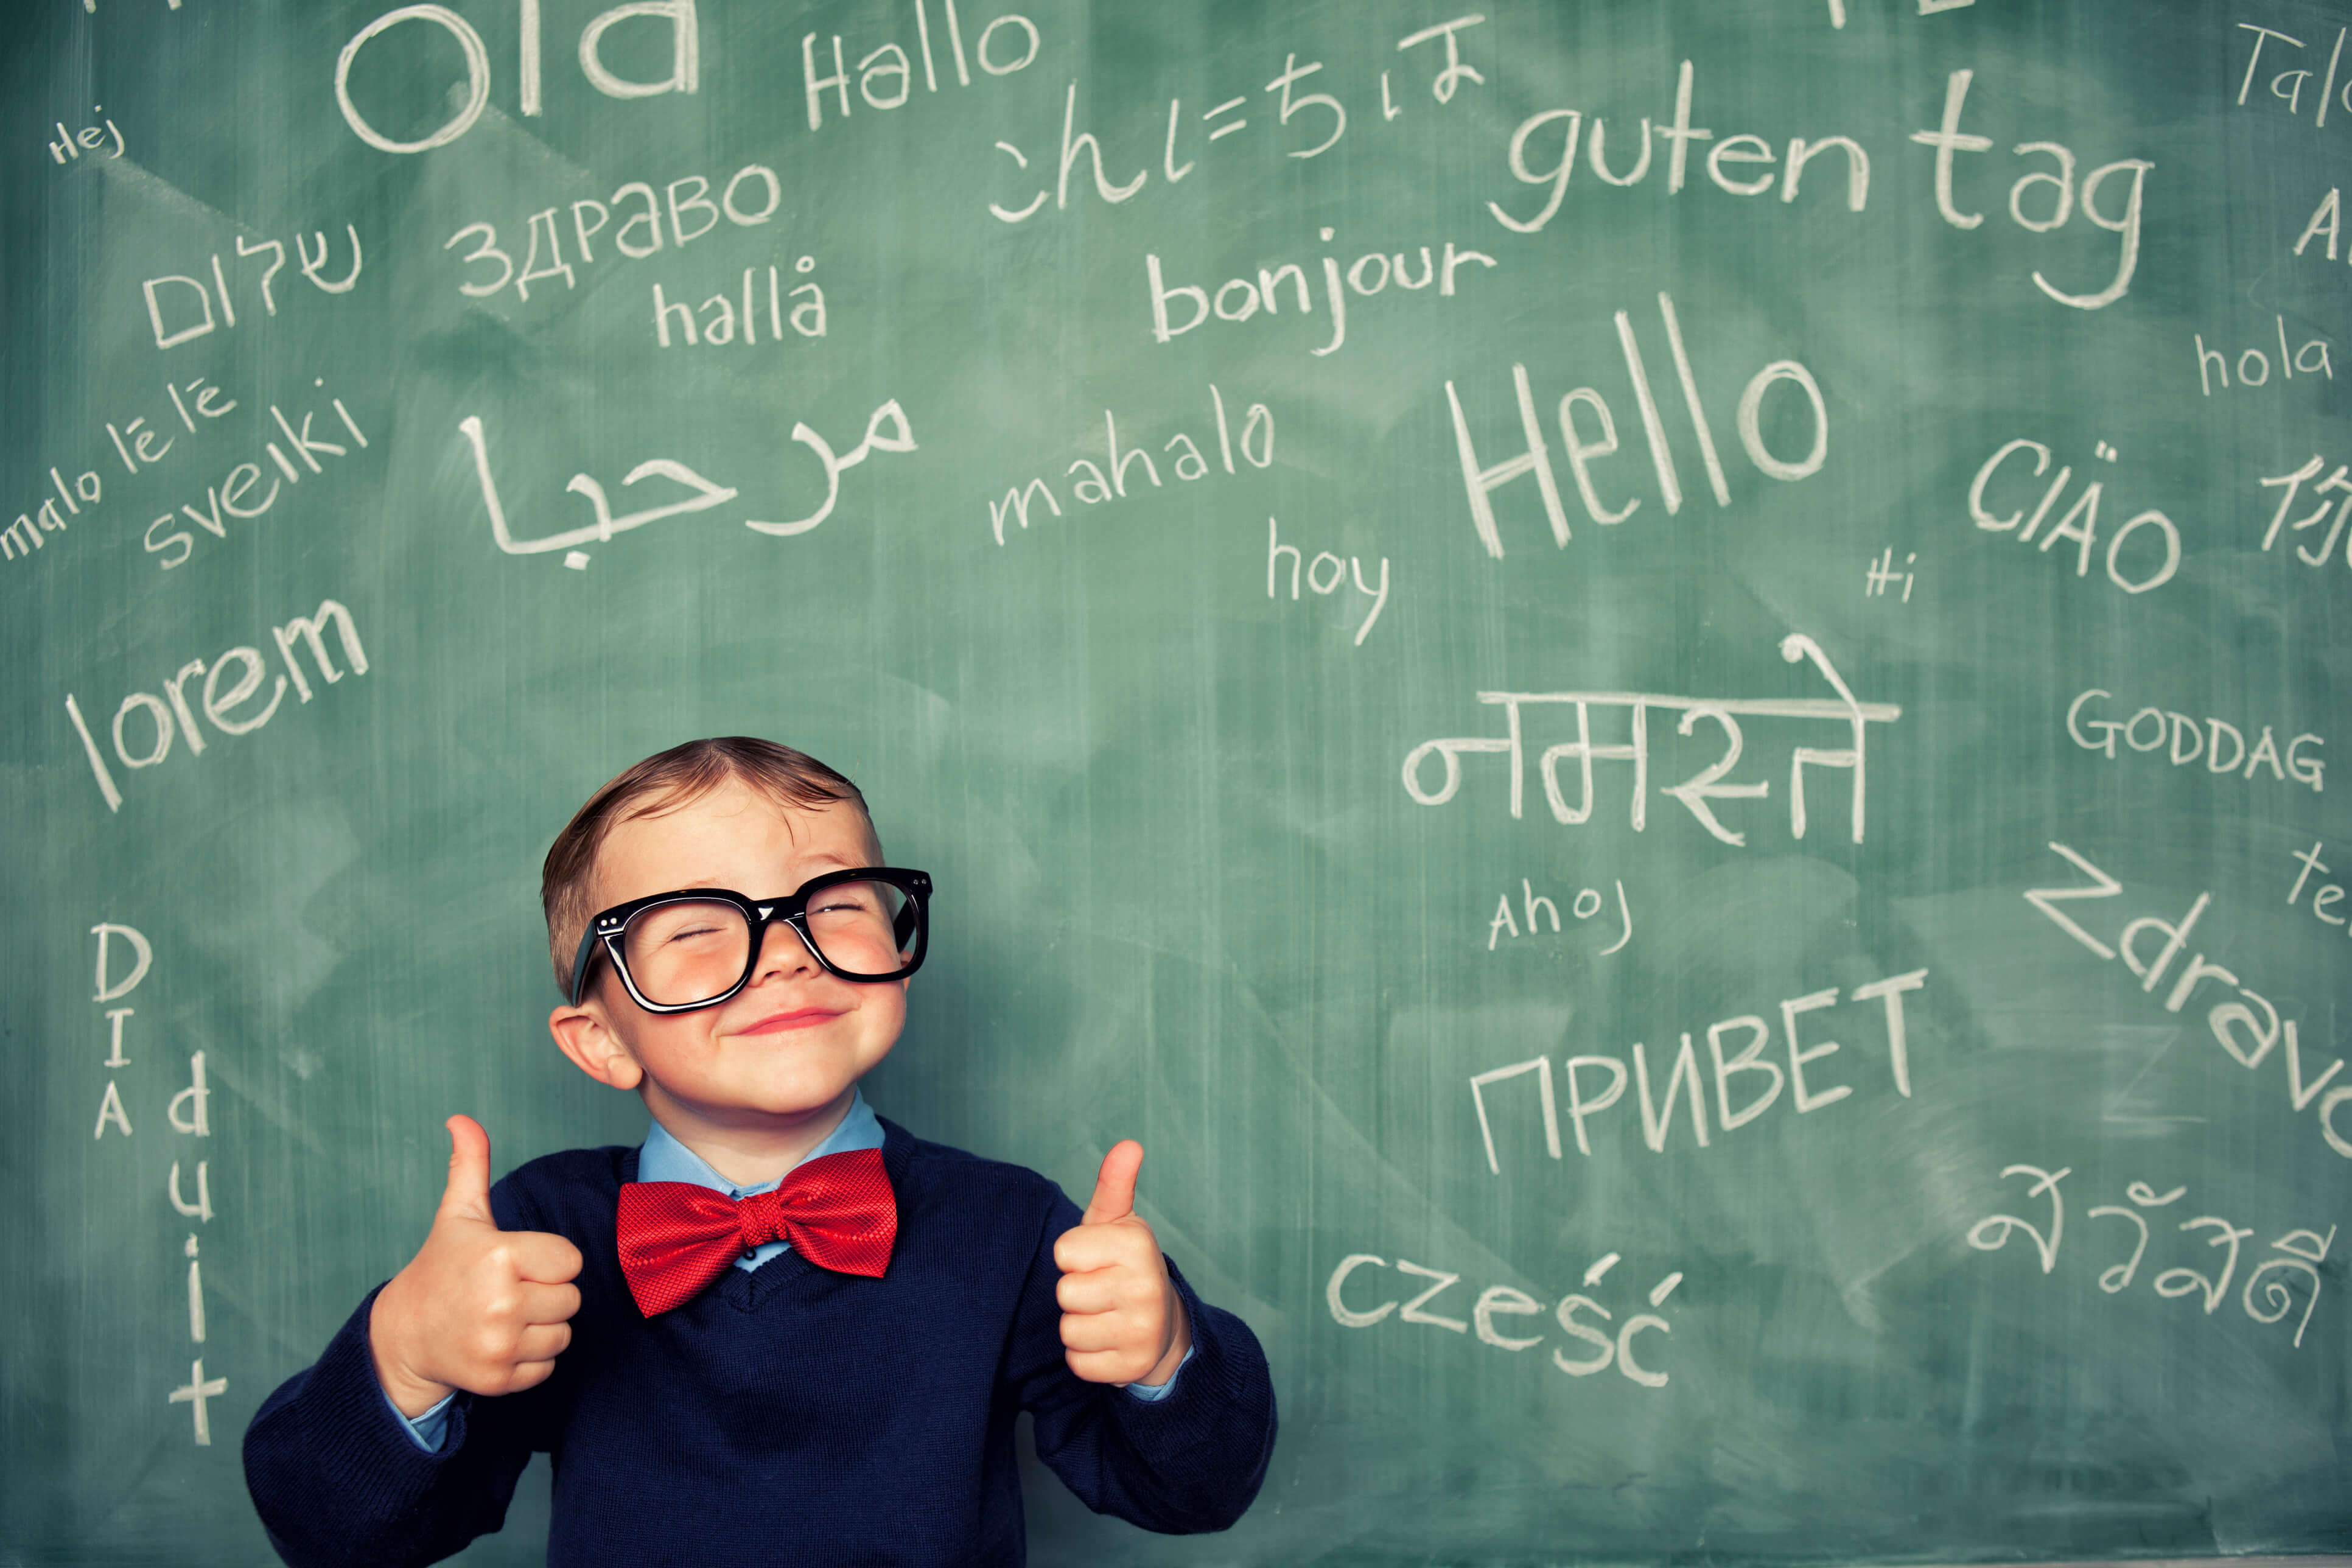 A young boy standing in front of a blackboard displaying 'hello' written in different languages